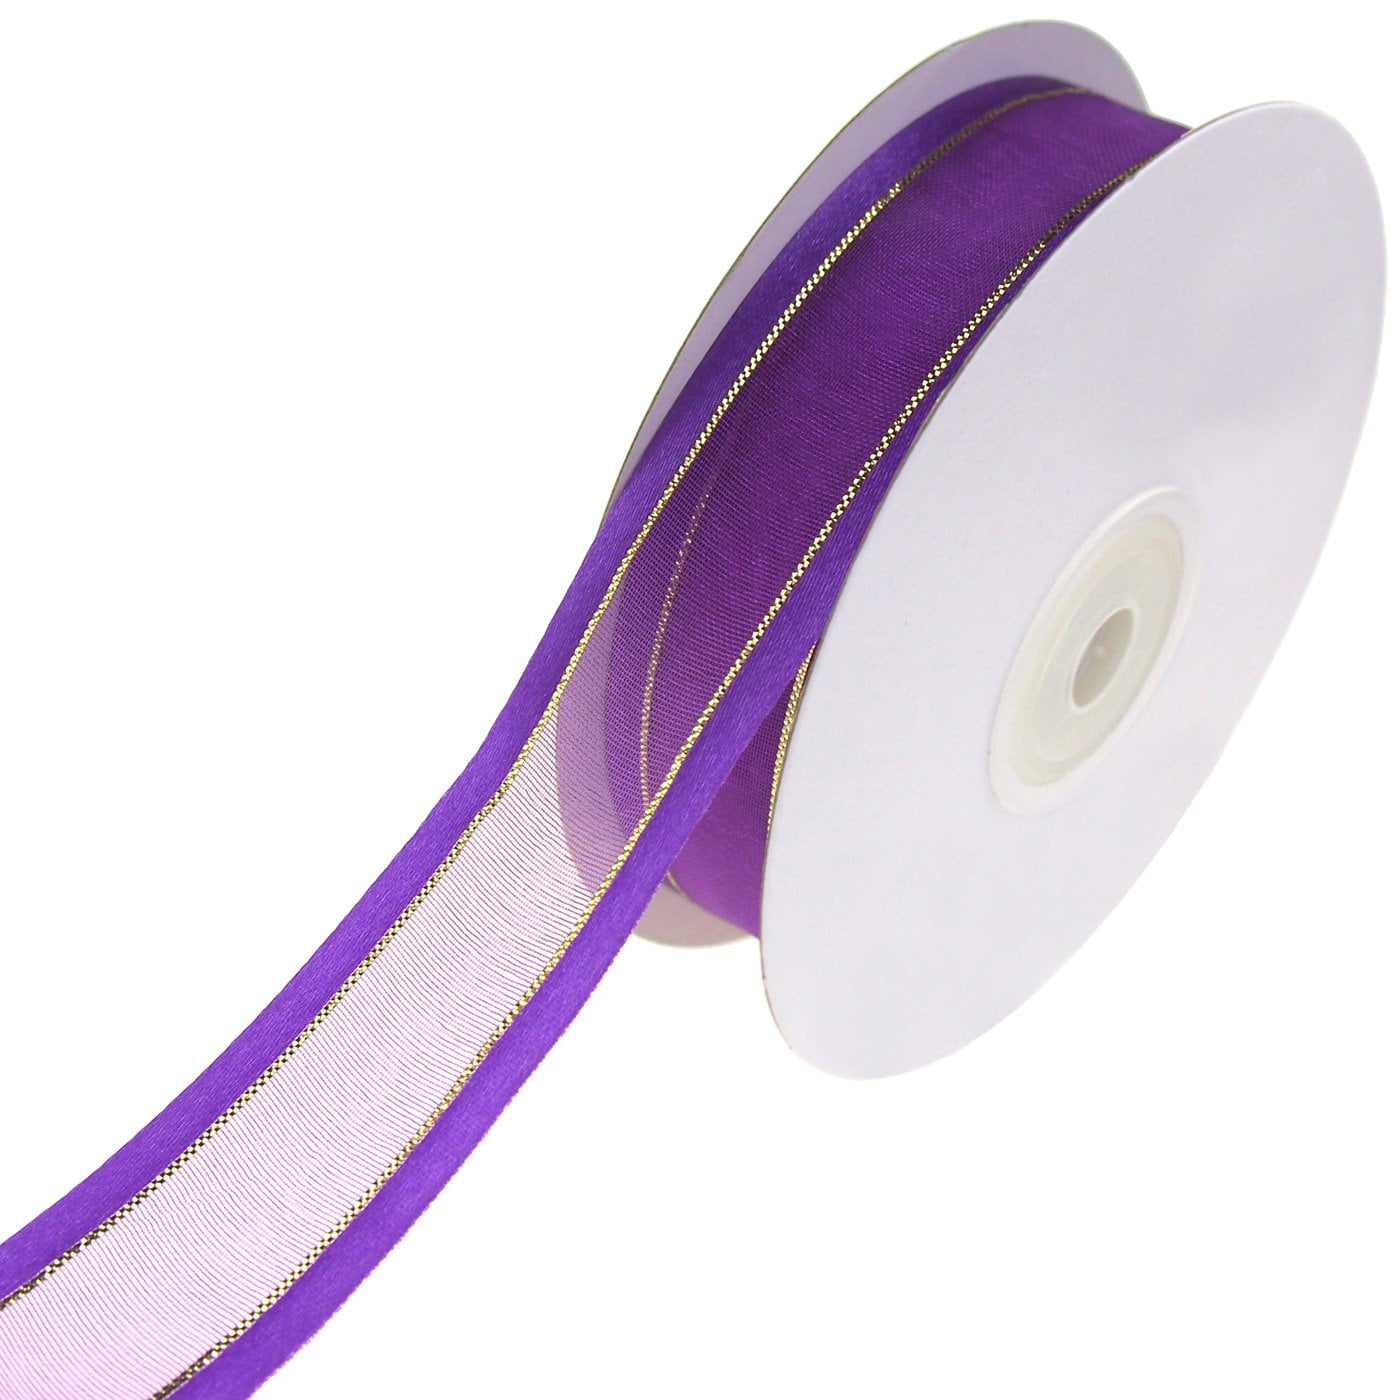 Details about   1,2,5,10 Meter Woven Edge Organza Ribbon 15 mm Width Decorative Ribbon 